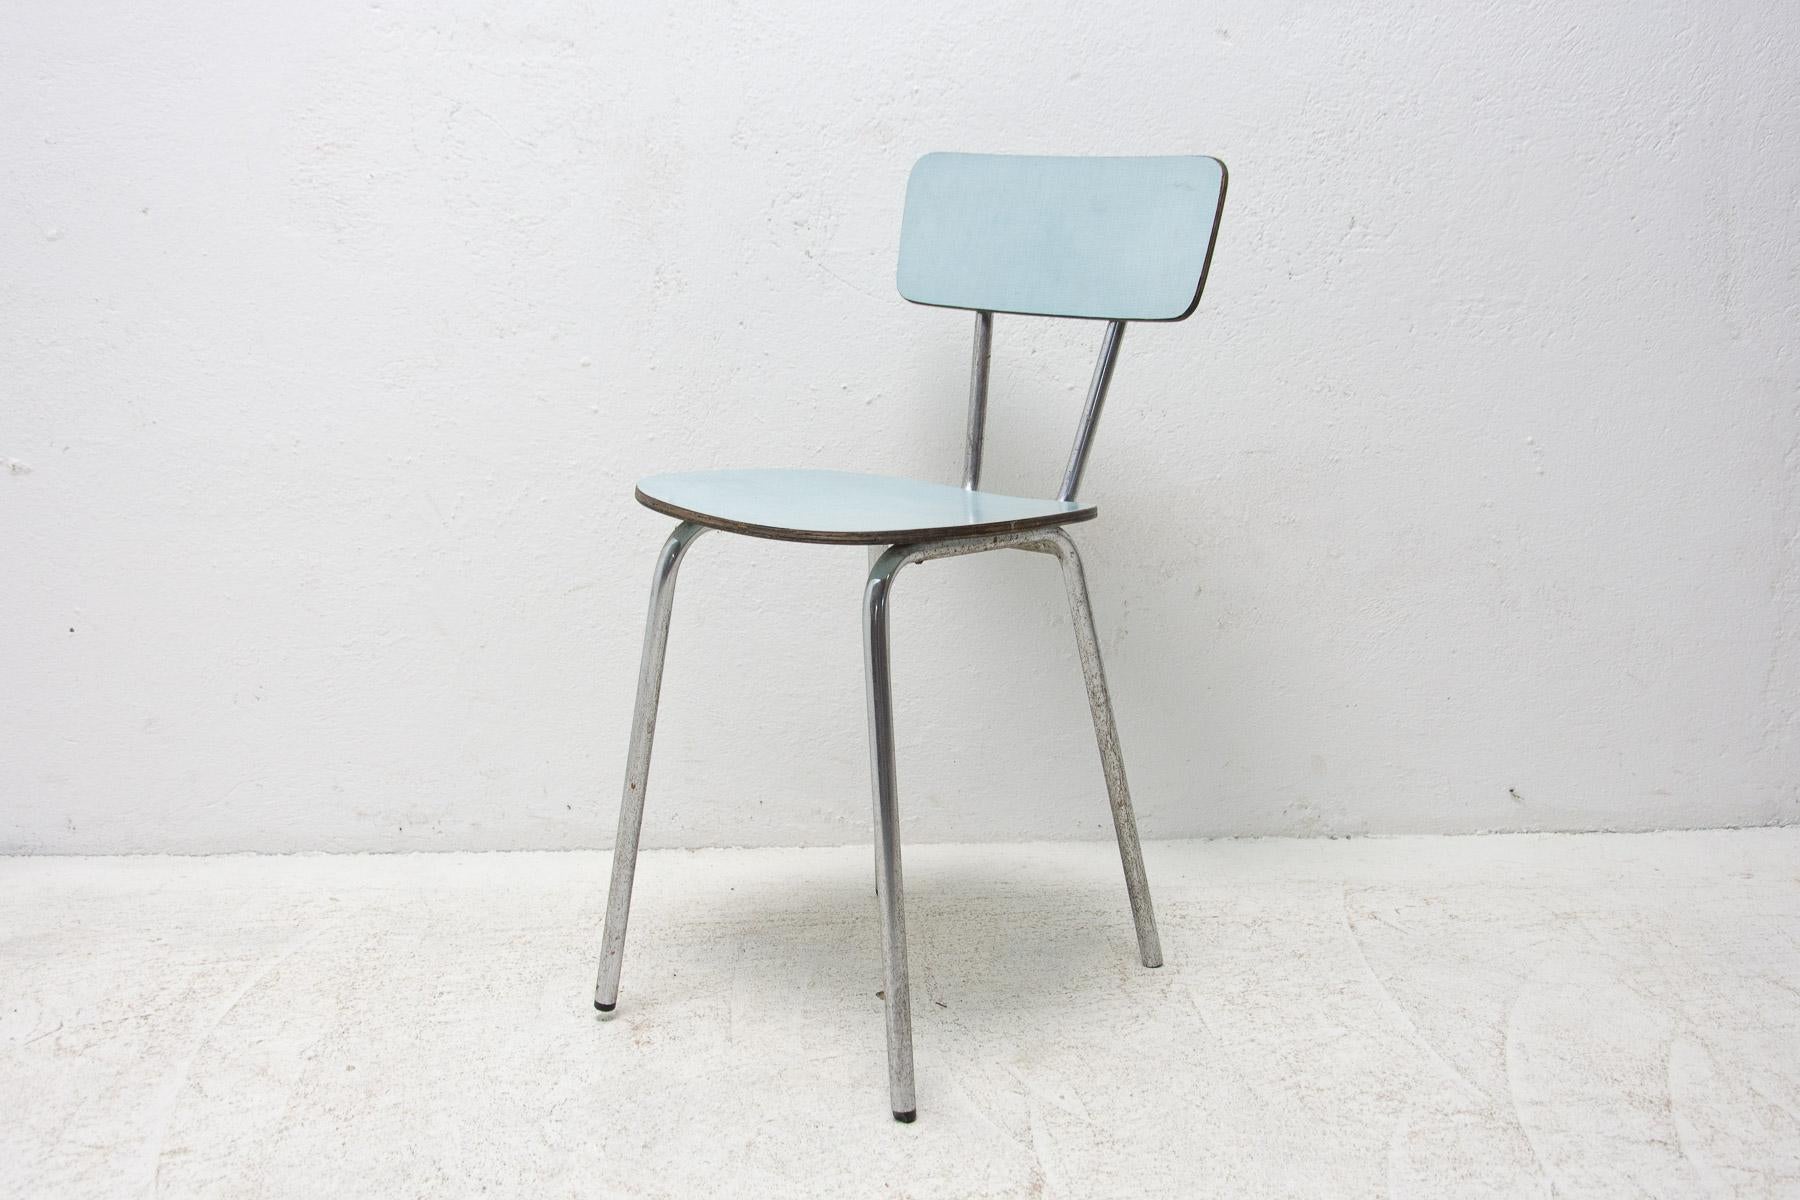 Mid-century color formica cafe or dining chair with chrome legs. Made in the 1960’s. In very good Vintage condition.

Measures: Height: 75 cm

Width: 37 cm

Depth: 38 cm

Seat height.: 46.